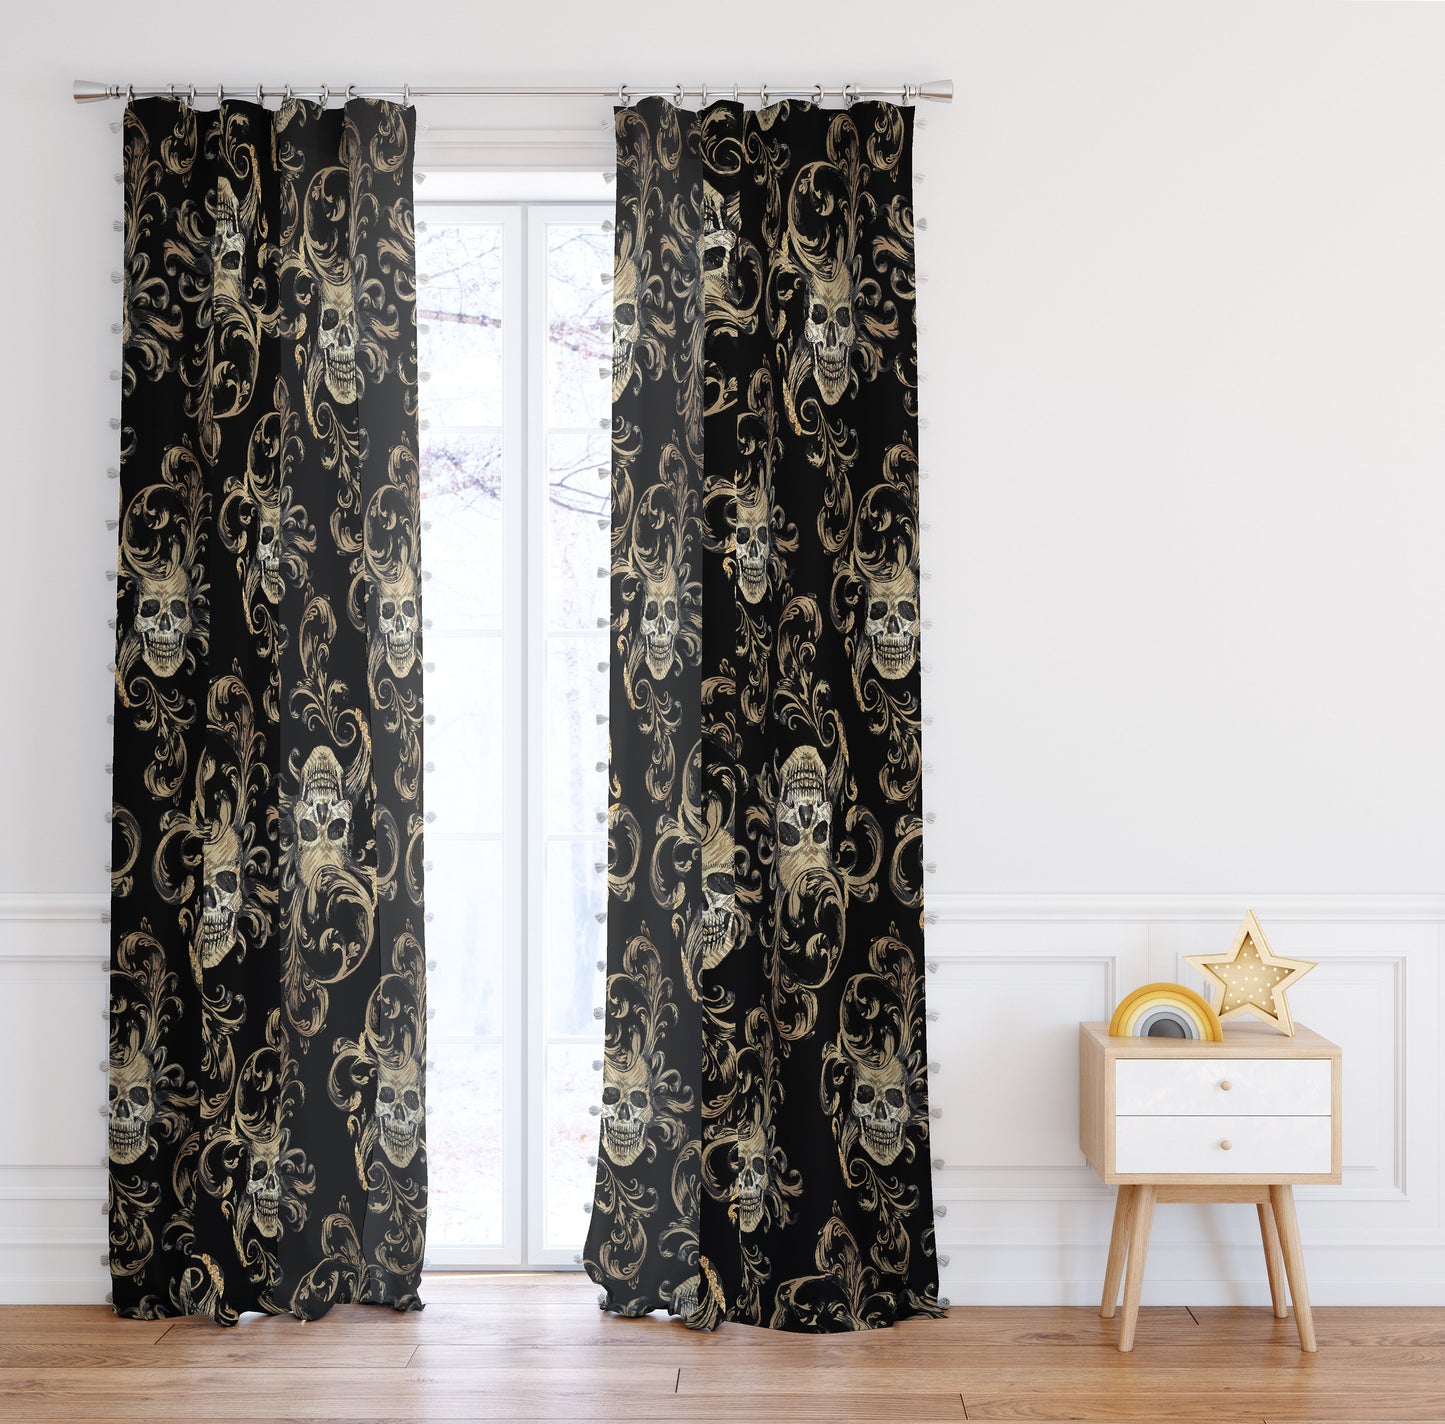 hand drawing romantic gothic scull design Curtains 2 PCS SET • room curtains • blackout • home decor